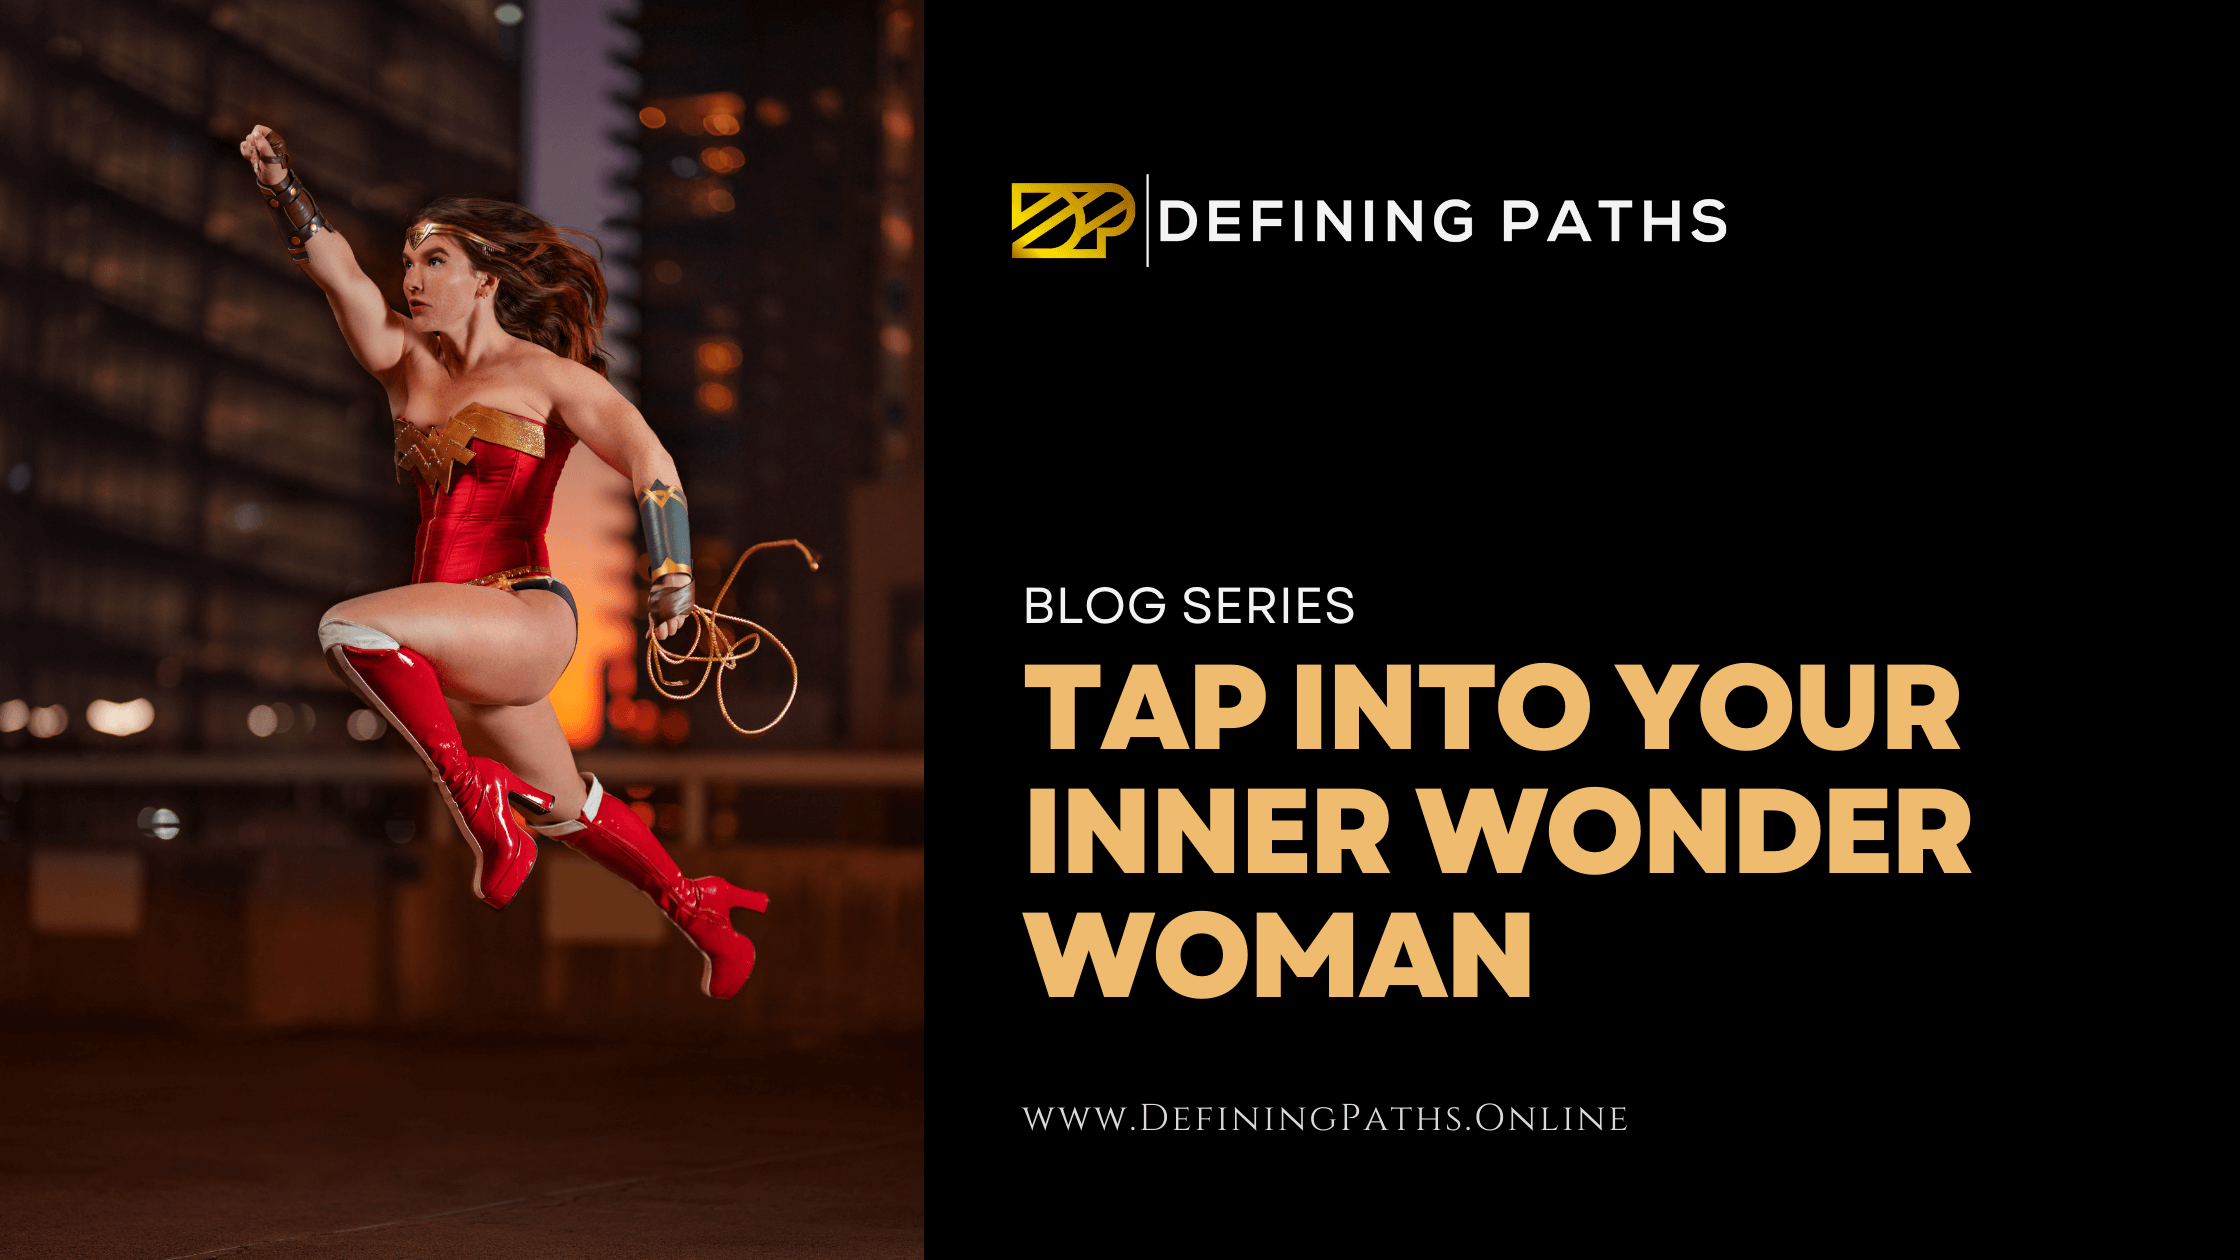 Featured image for “Tap into Your Inner Wonder Woman by Managing Your Reality”